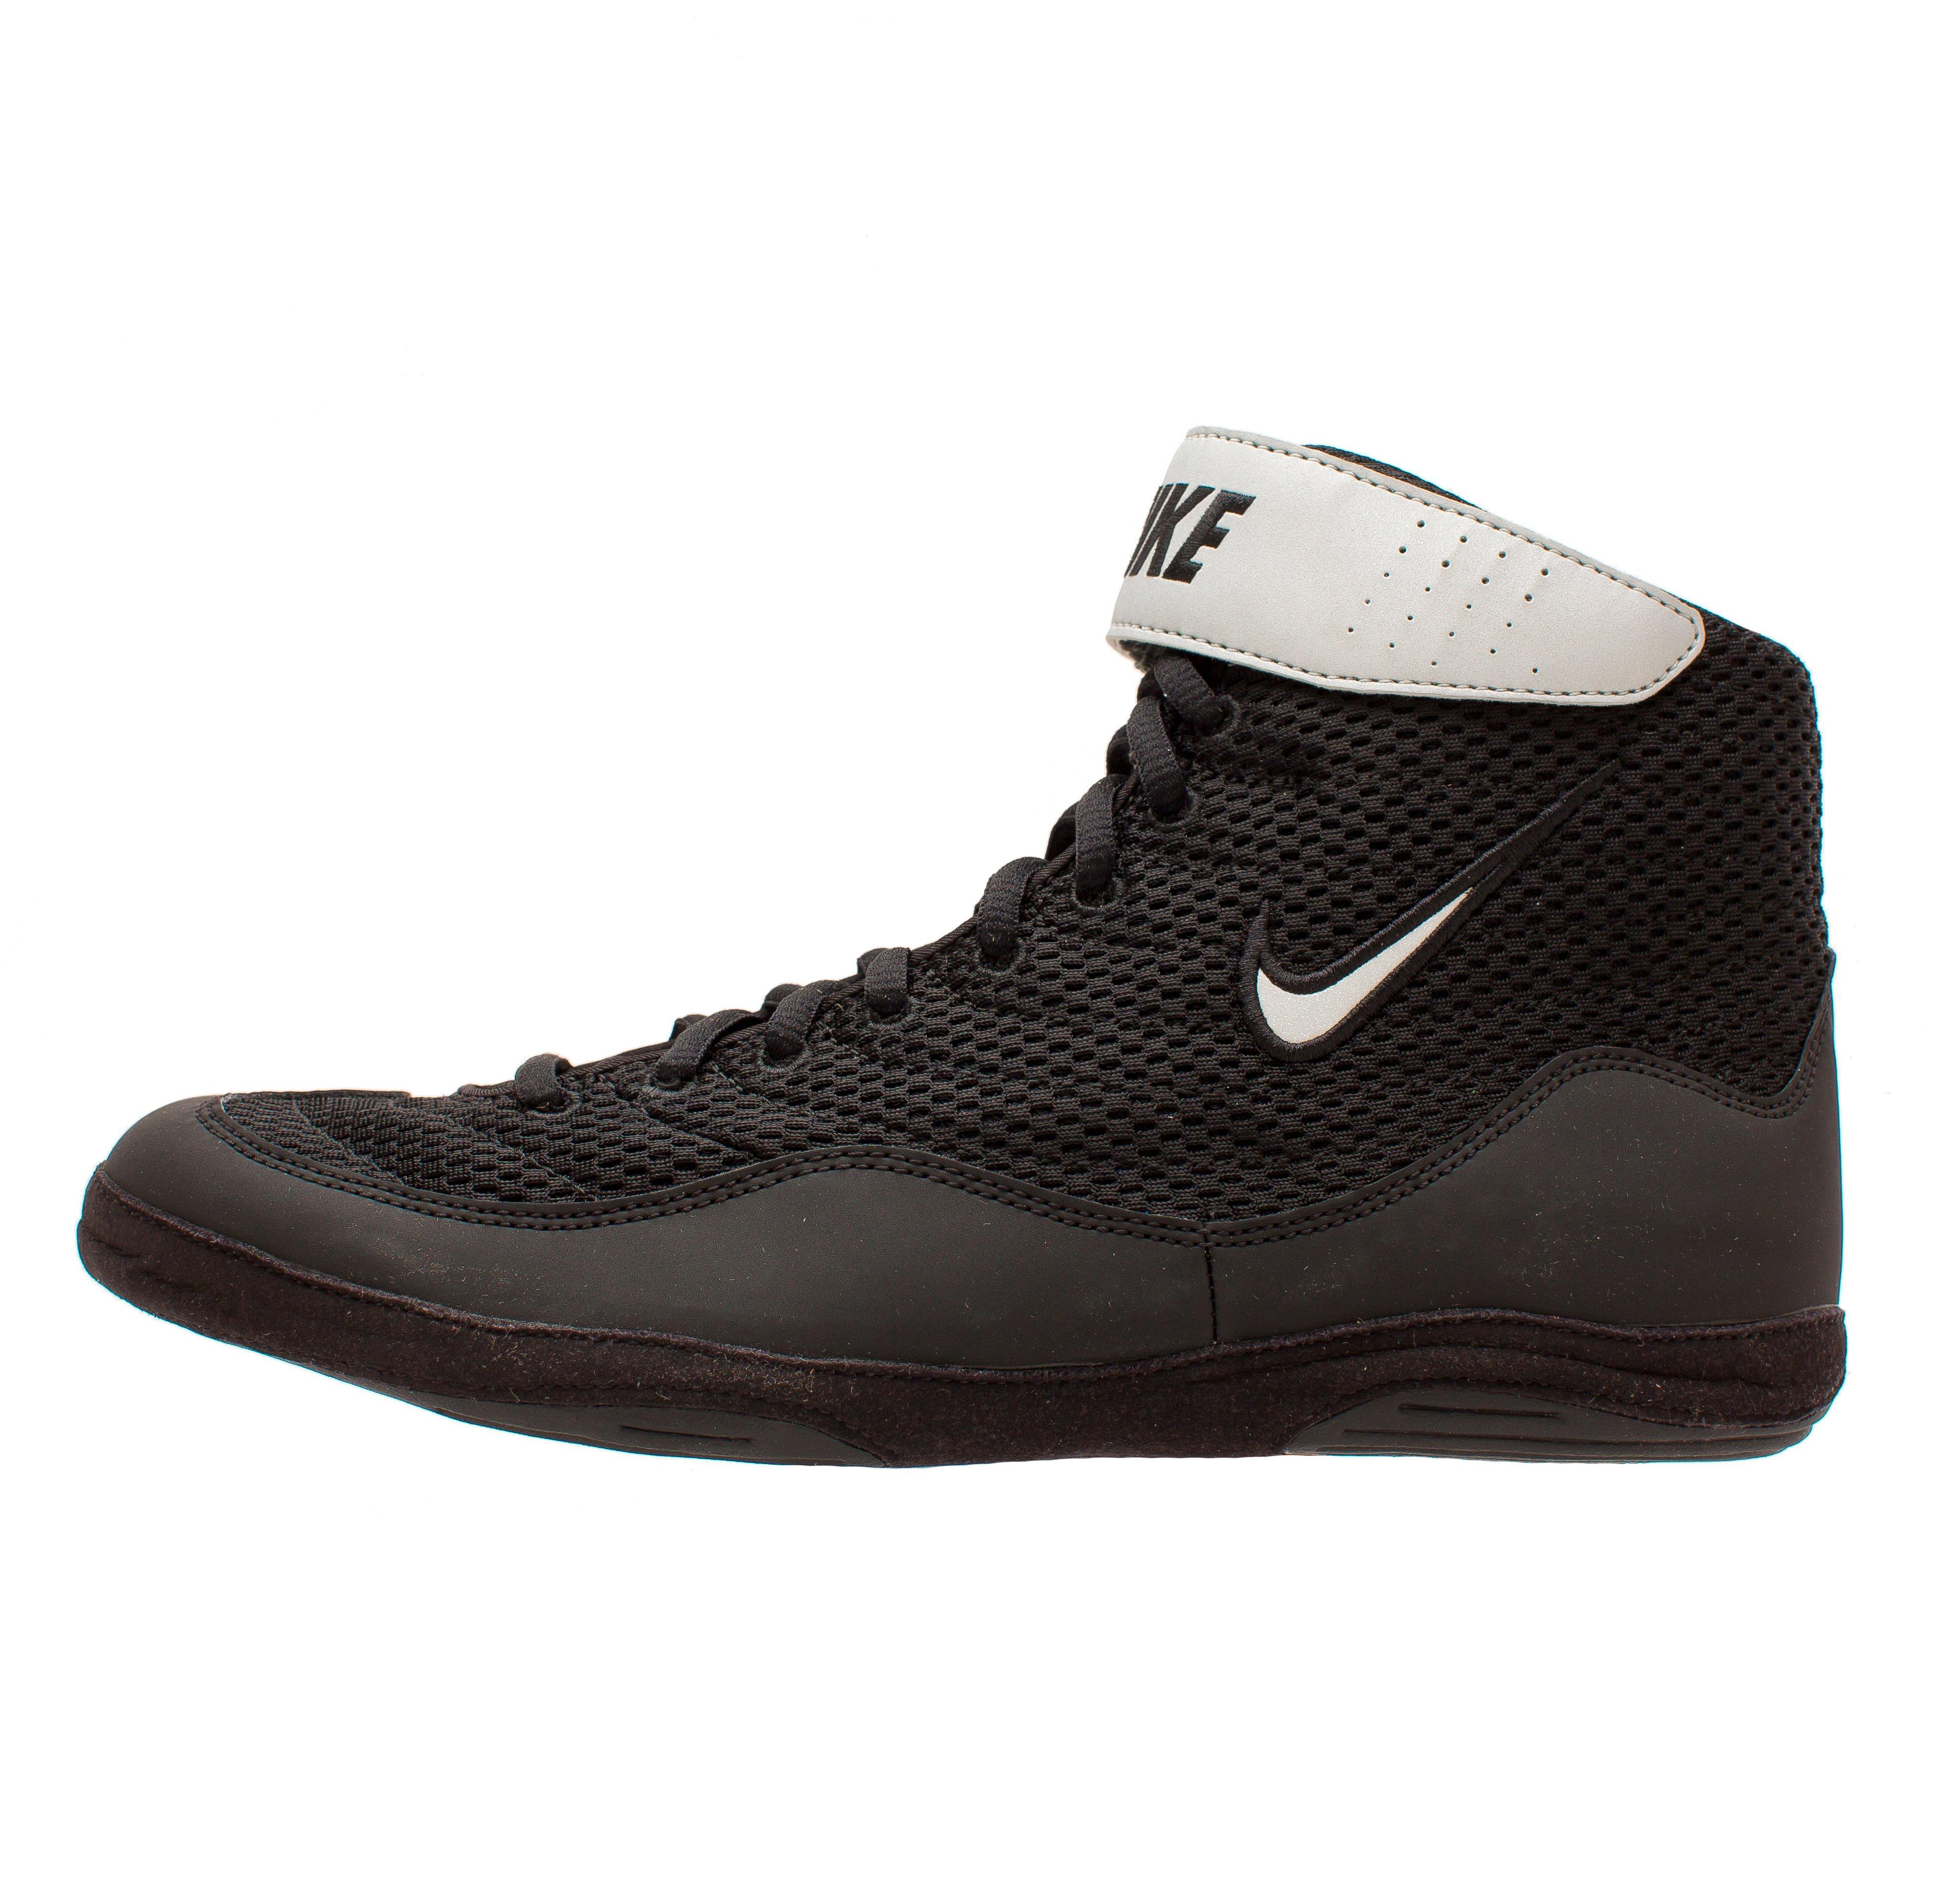 nike inflict 3 wrestling shoes